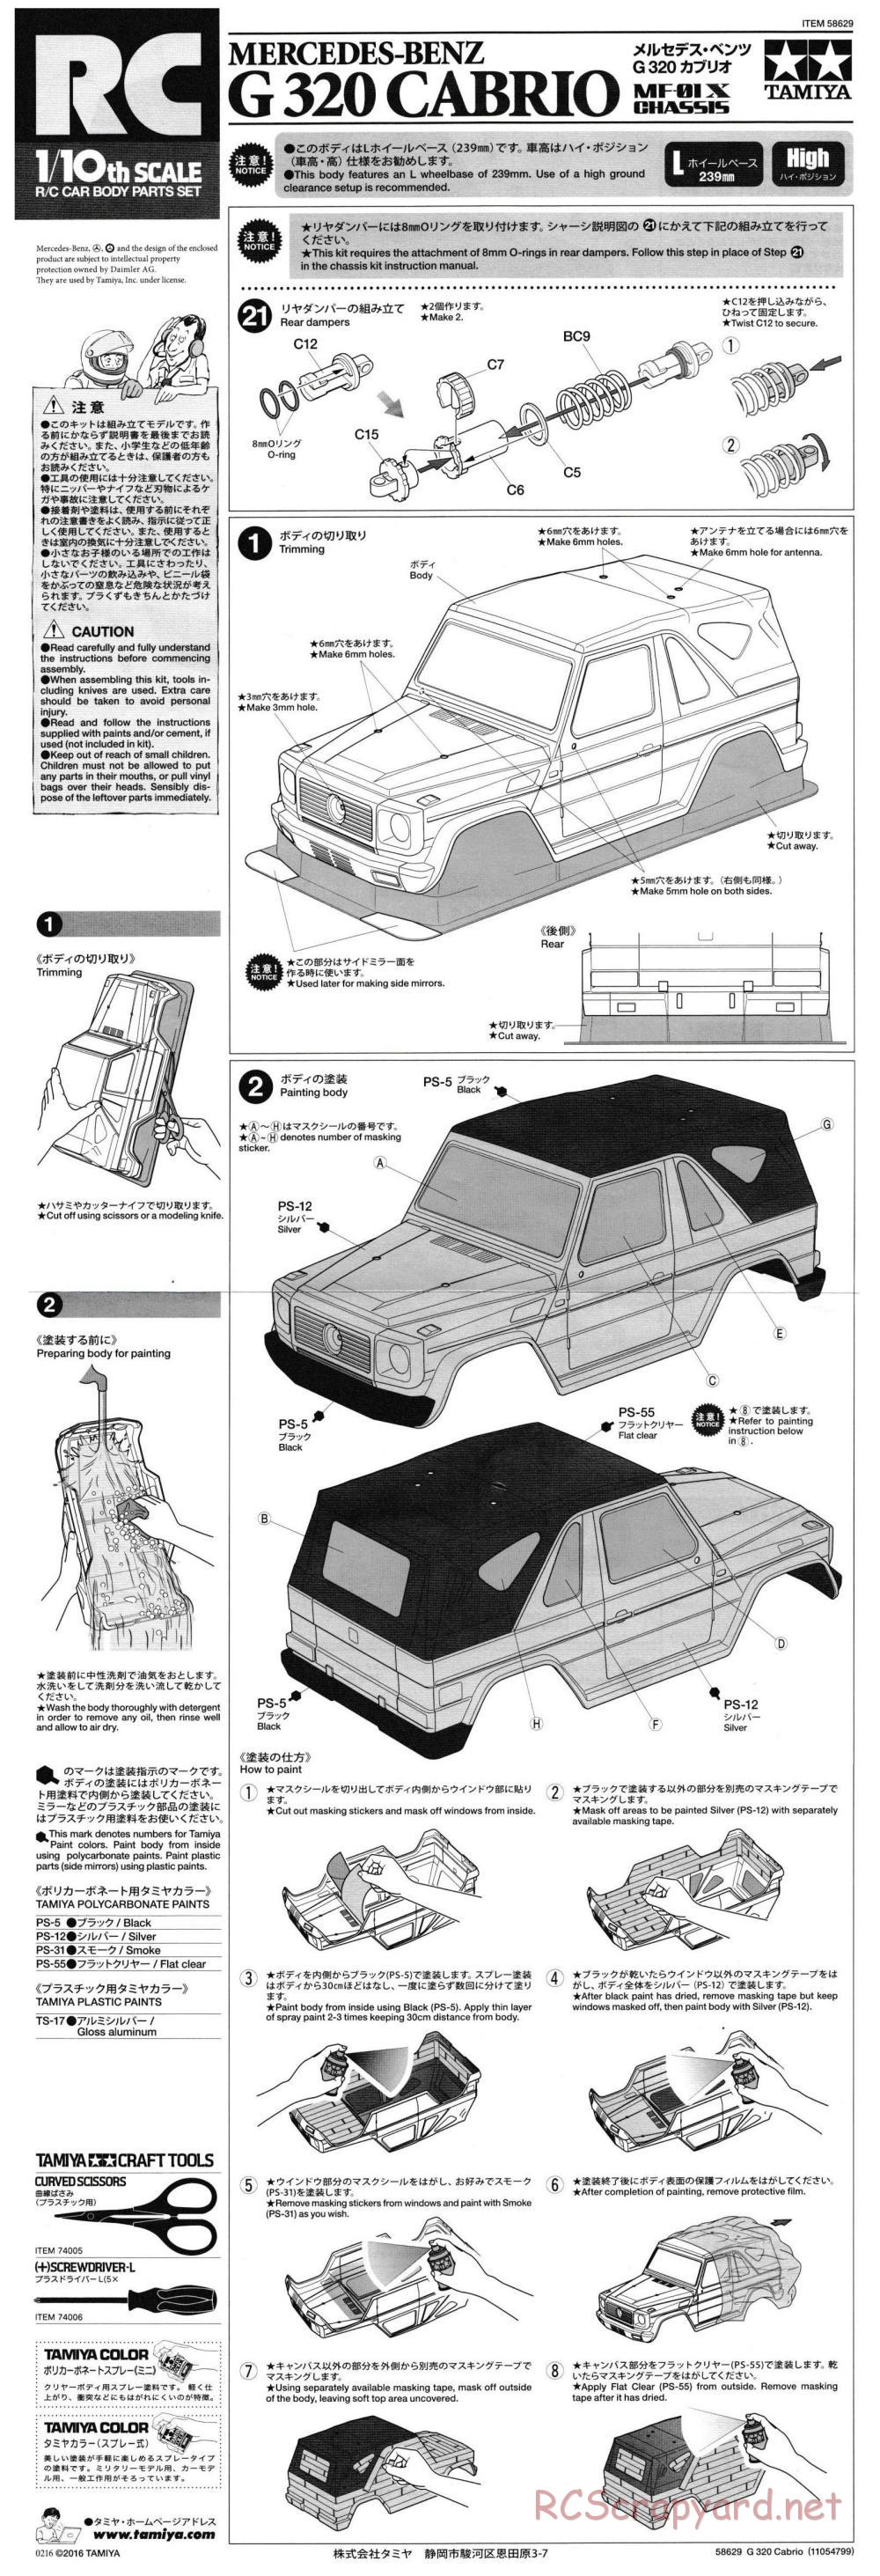 Tamiya - Mercedes Benz G-320 Cabrio - MF-01X Chassis - Body Manual - Page 1